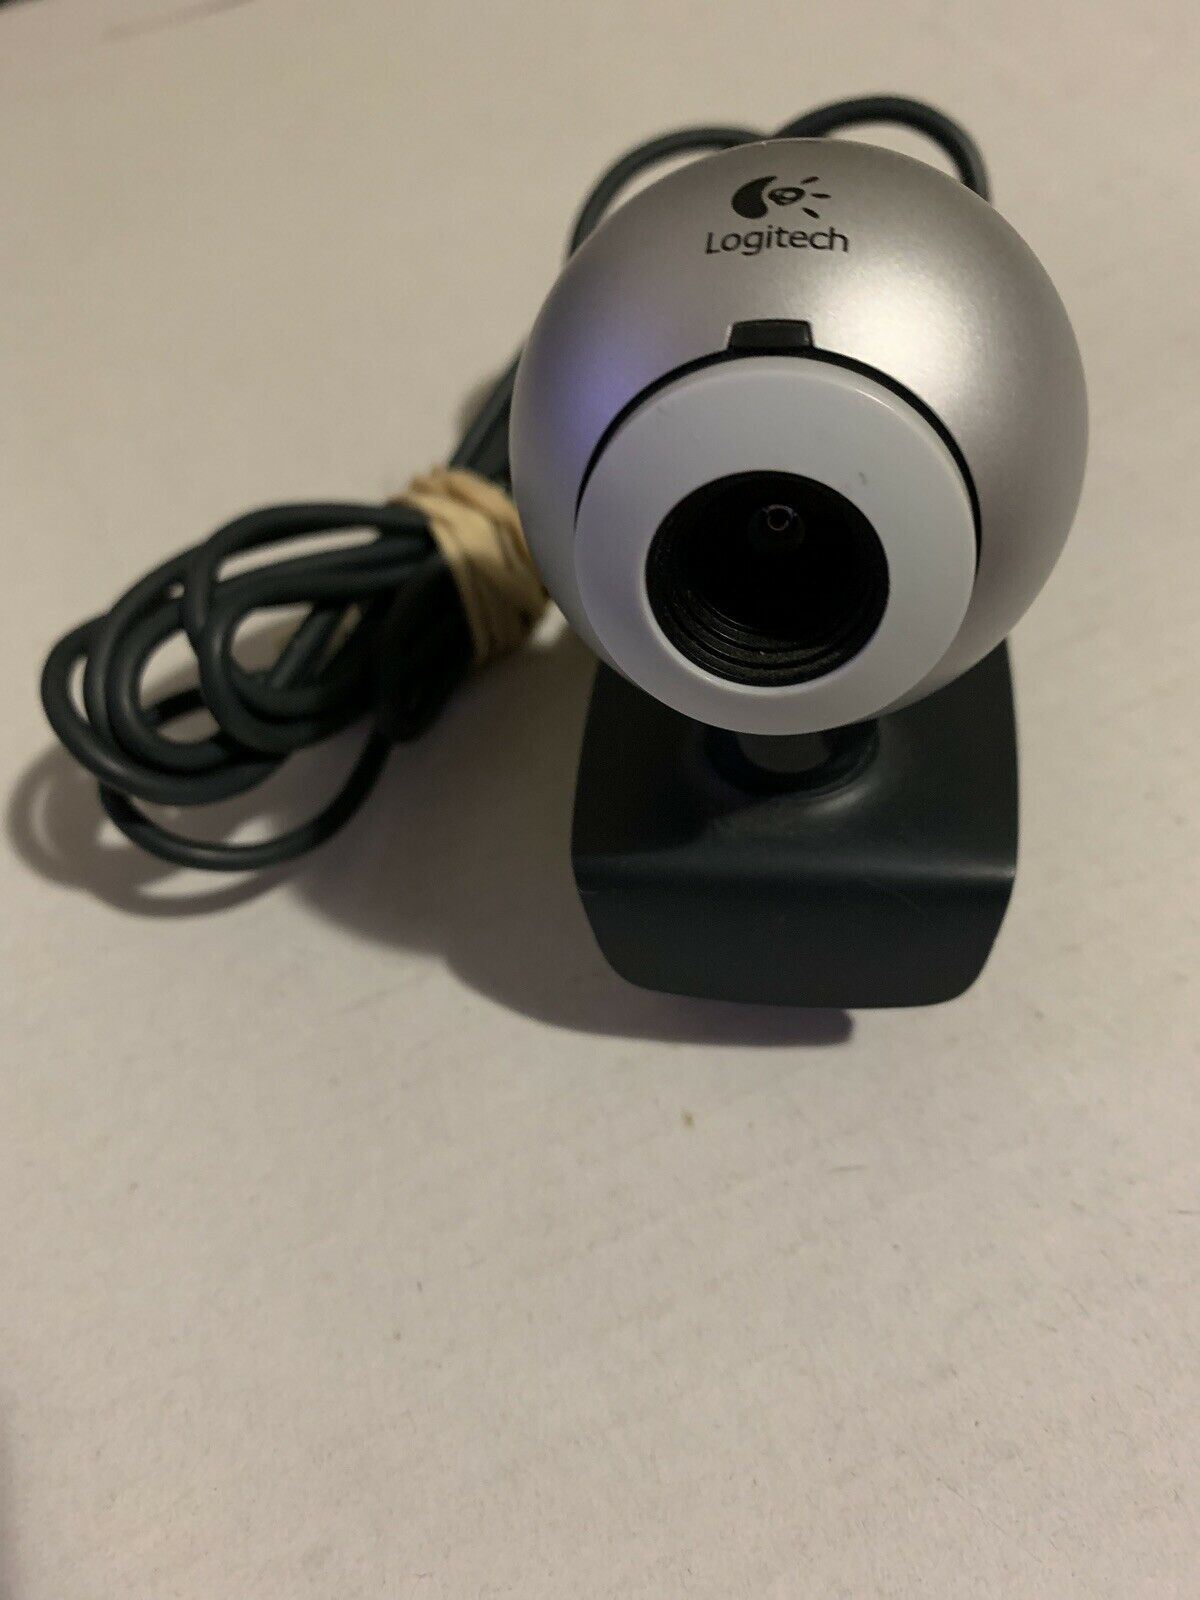 Logitech Webcam V-U0011 Tested And Working 1.3 MP Built In Microphone